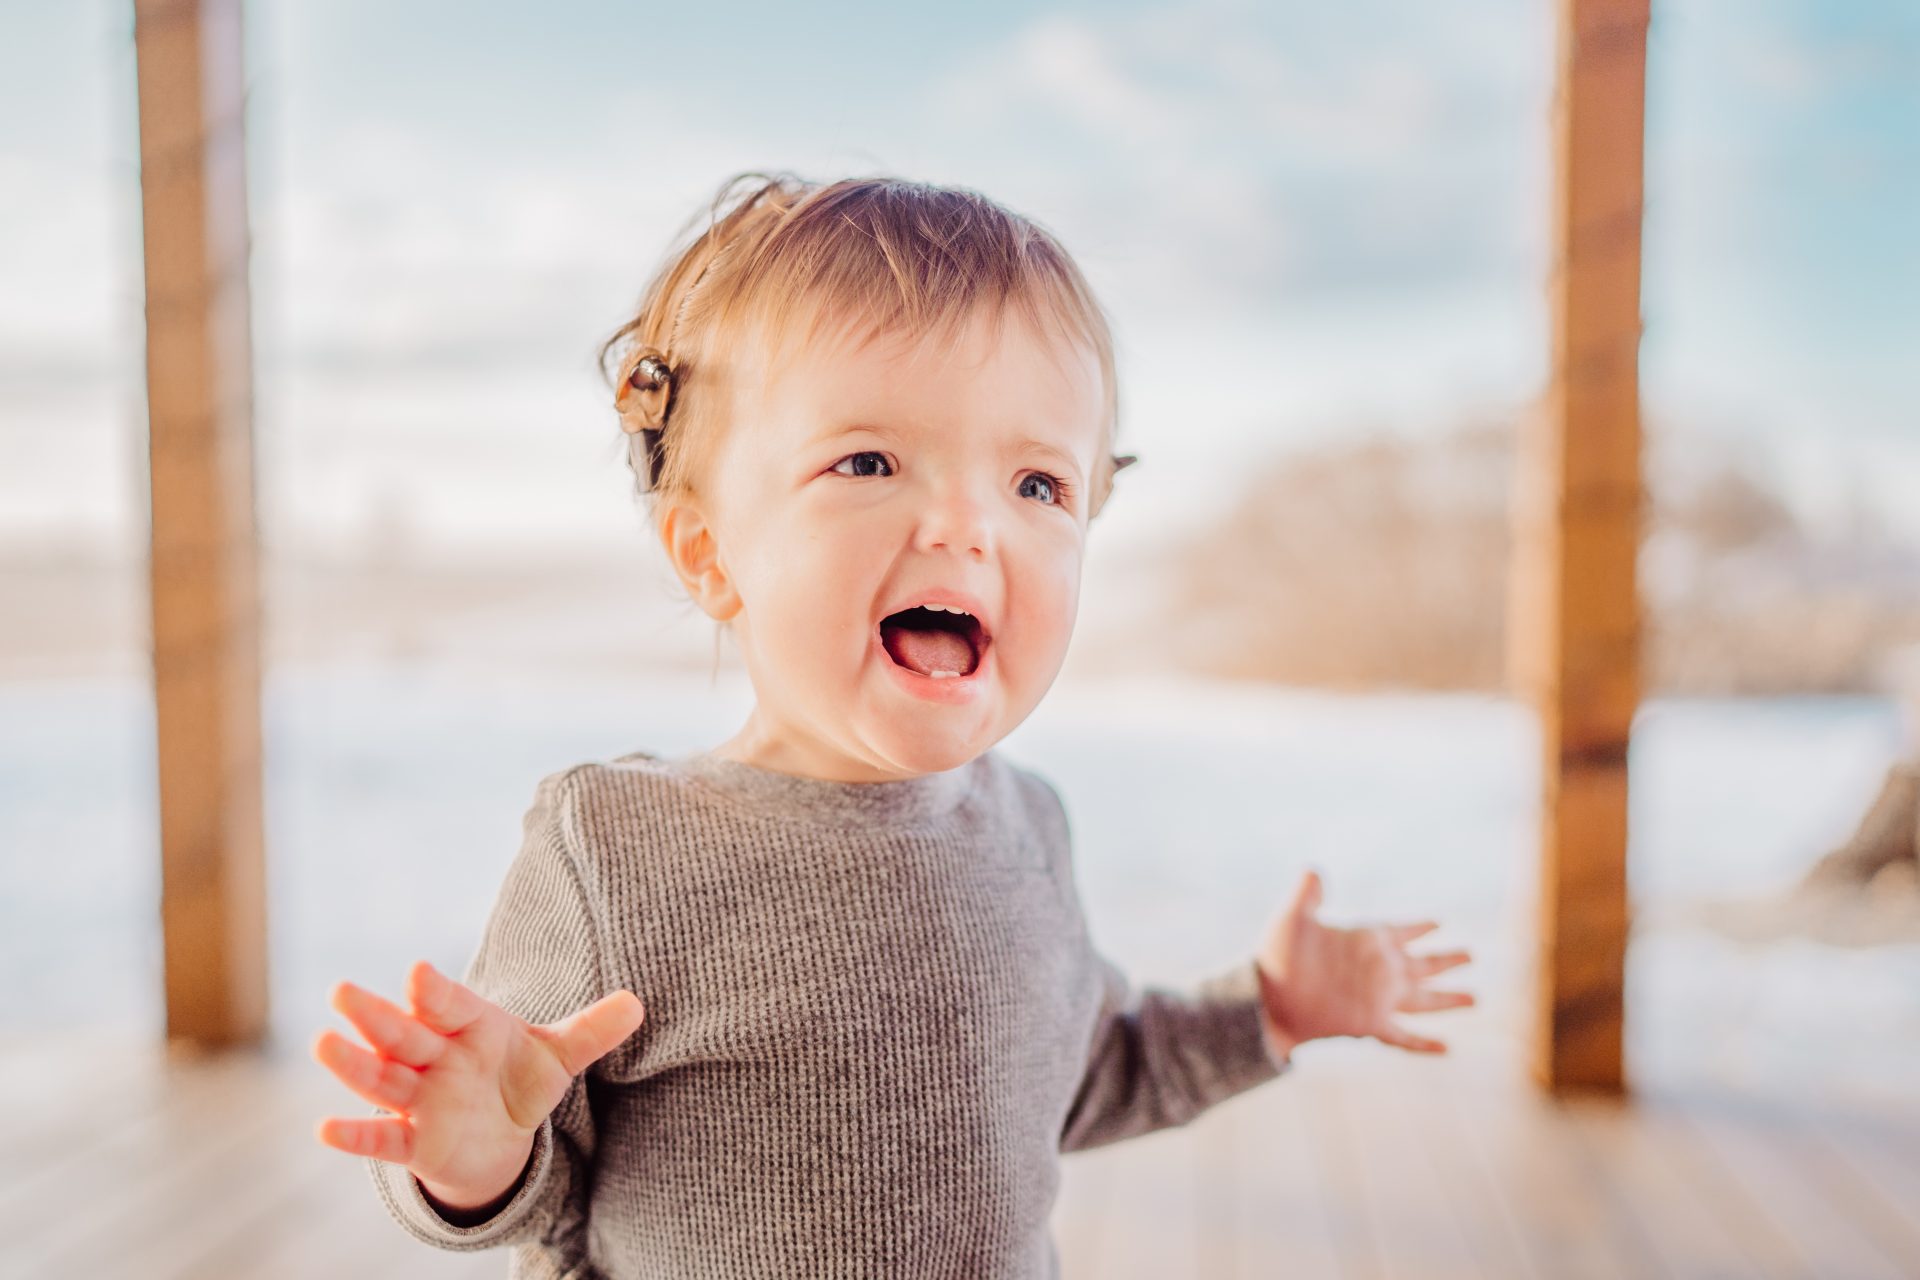 A joyful toddler with a bright smile and adorable pigtail hairstyle expressing excitement and wonder on a sunny day, embodying the spirited essence celebrated in children's books about disabilities.